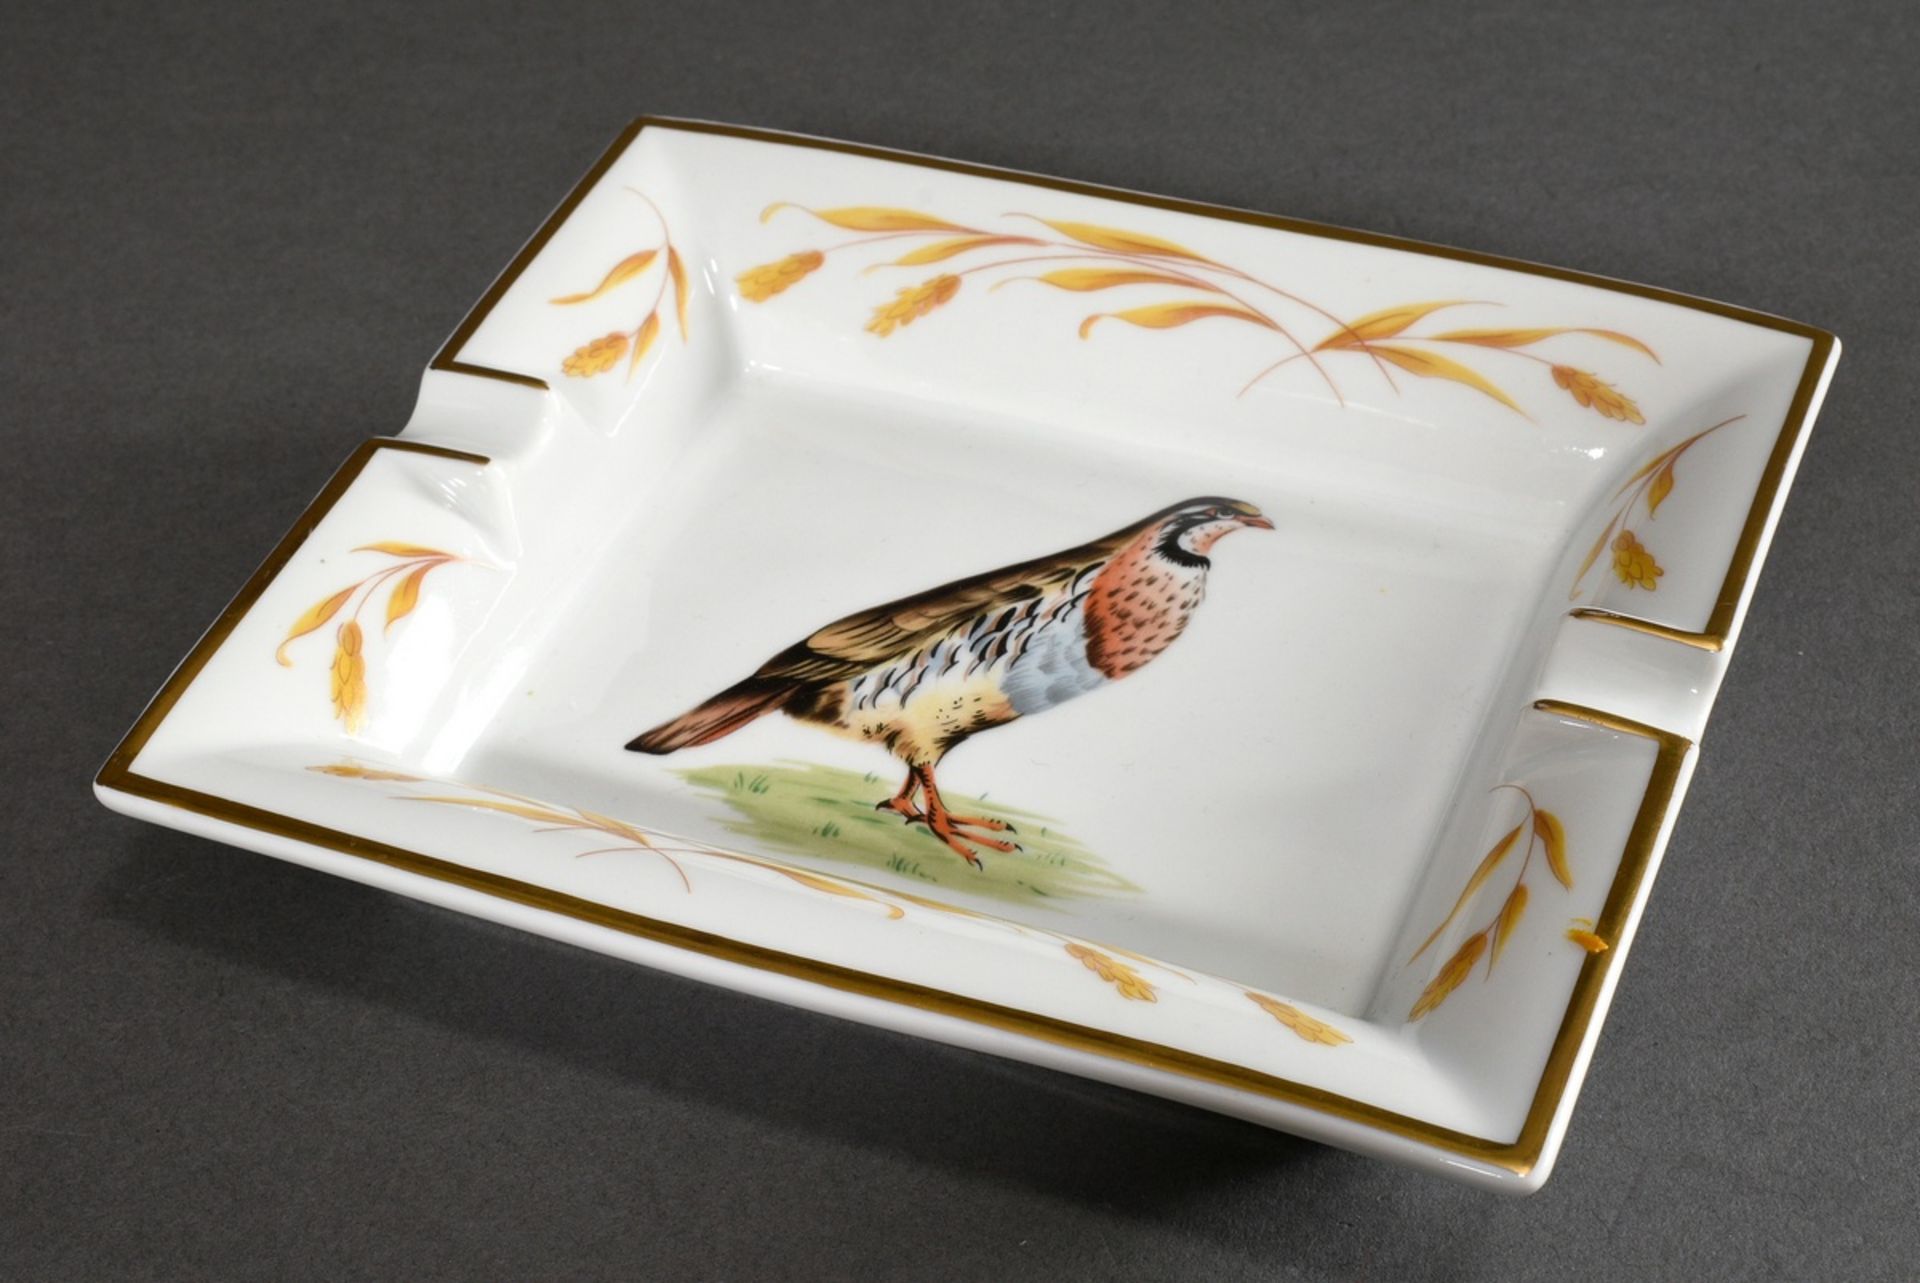 Hermès ashtray with print decoration "Partridge and ears of corn", 19x15,5cm - Image 2 of 5